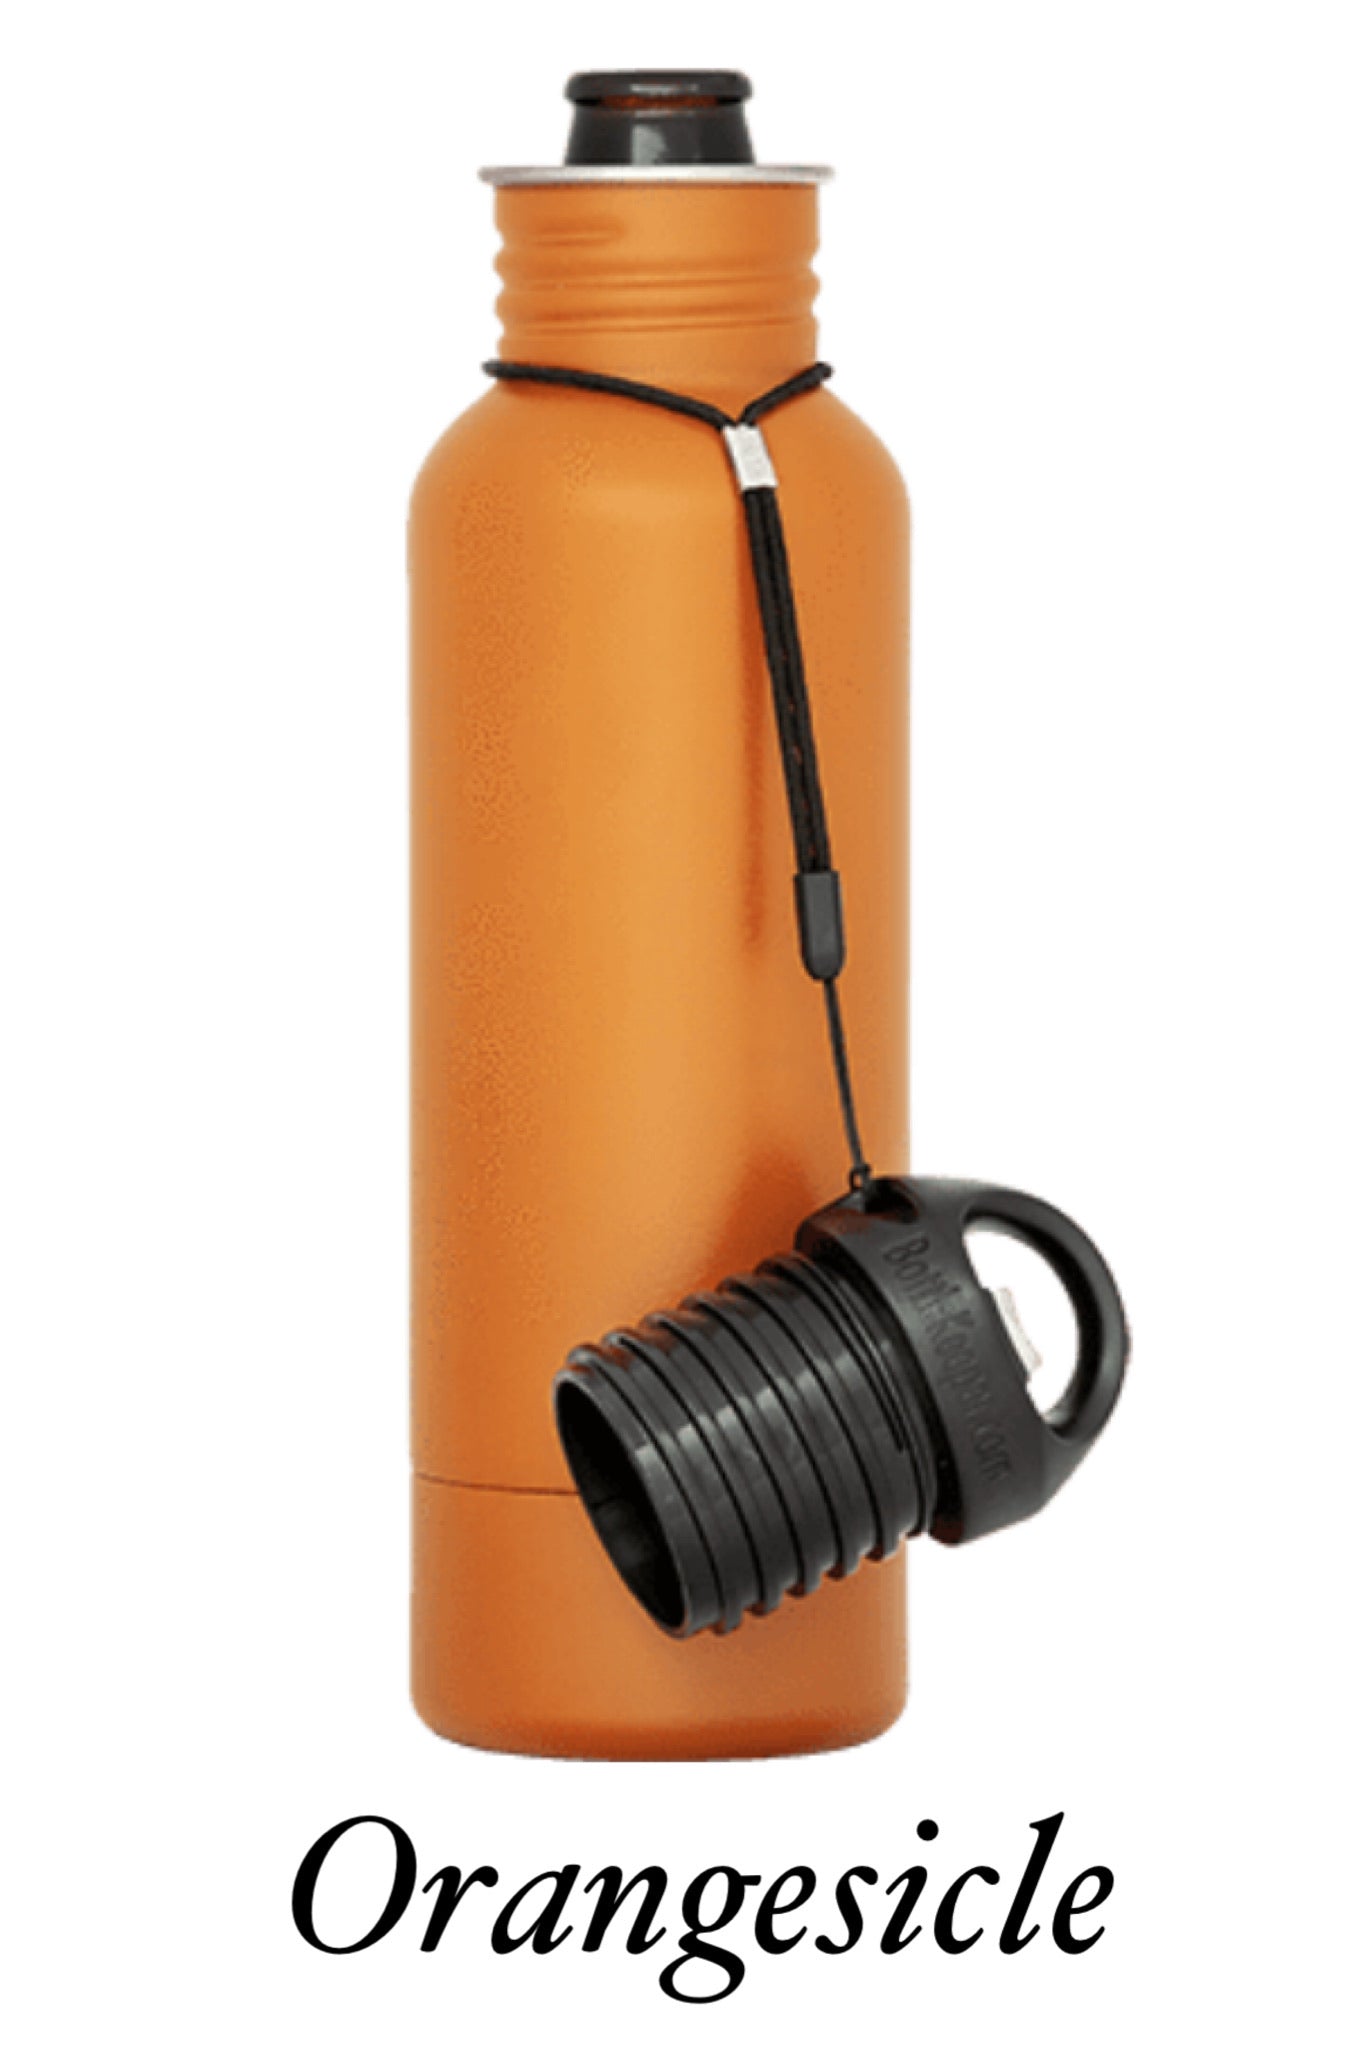  BottleKeeper - The Standard 2.0 - The Original Stainless Steel  Bottle Holder and Insulator to Keep Your Beer Colder (Stainless): Home &  Kitchen